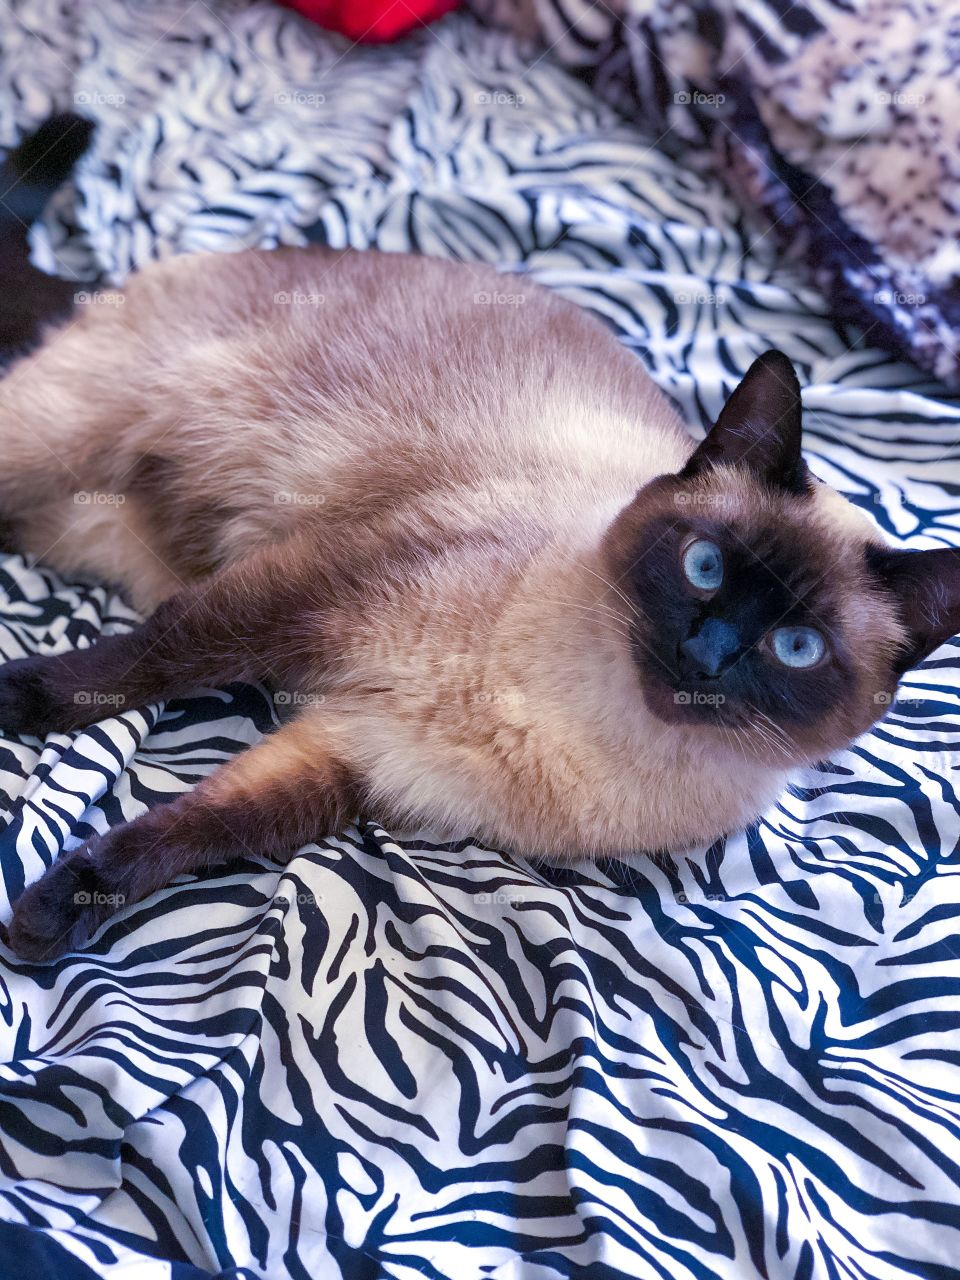 My Siamese cat peaches with pretty blue eyes